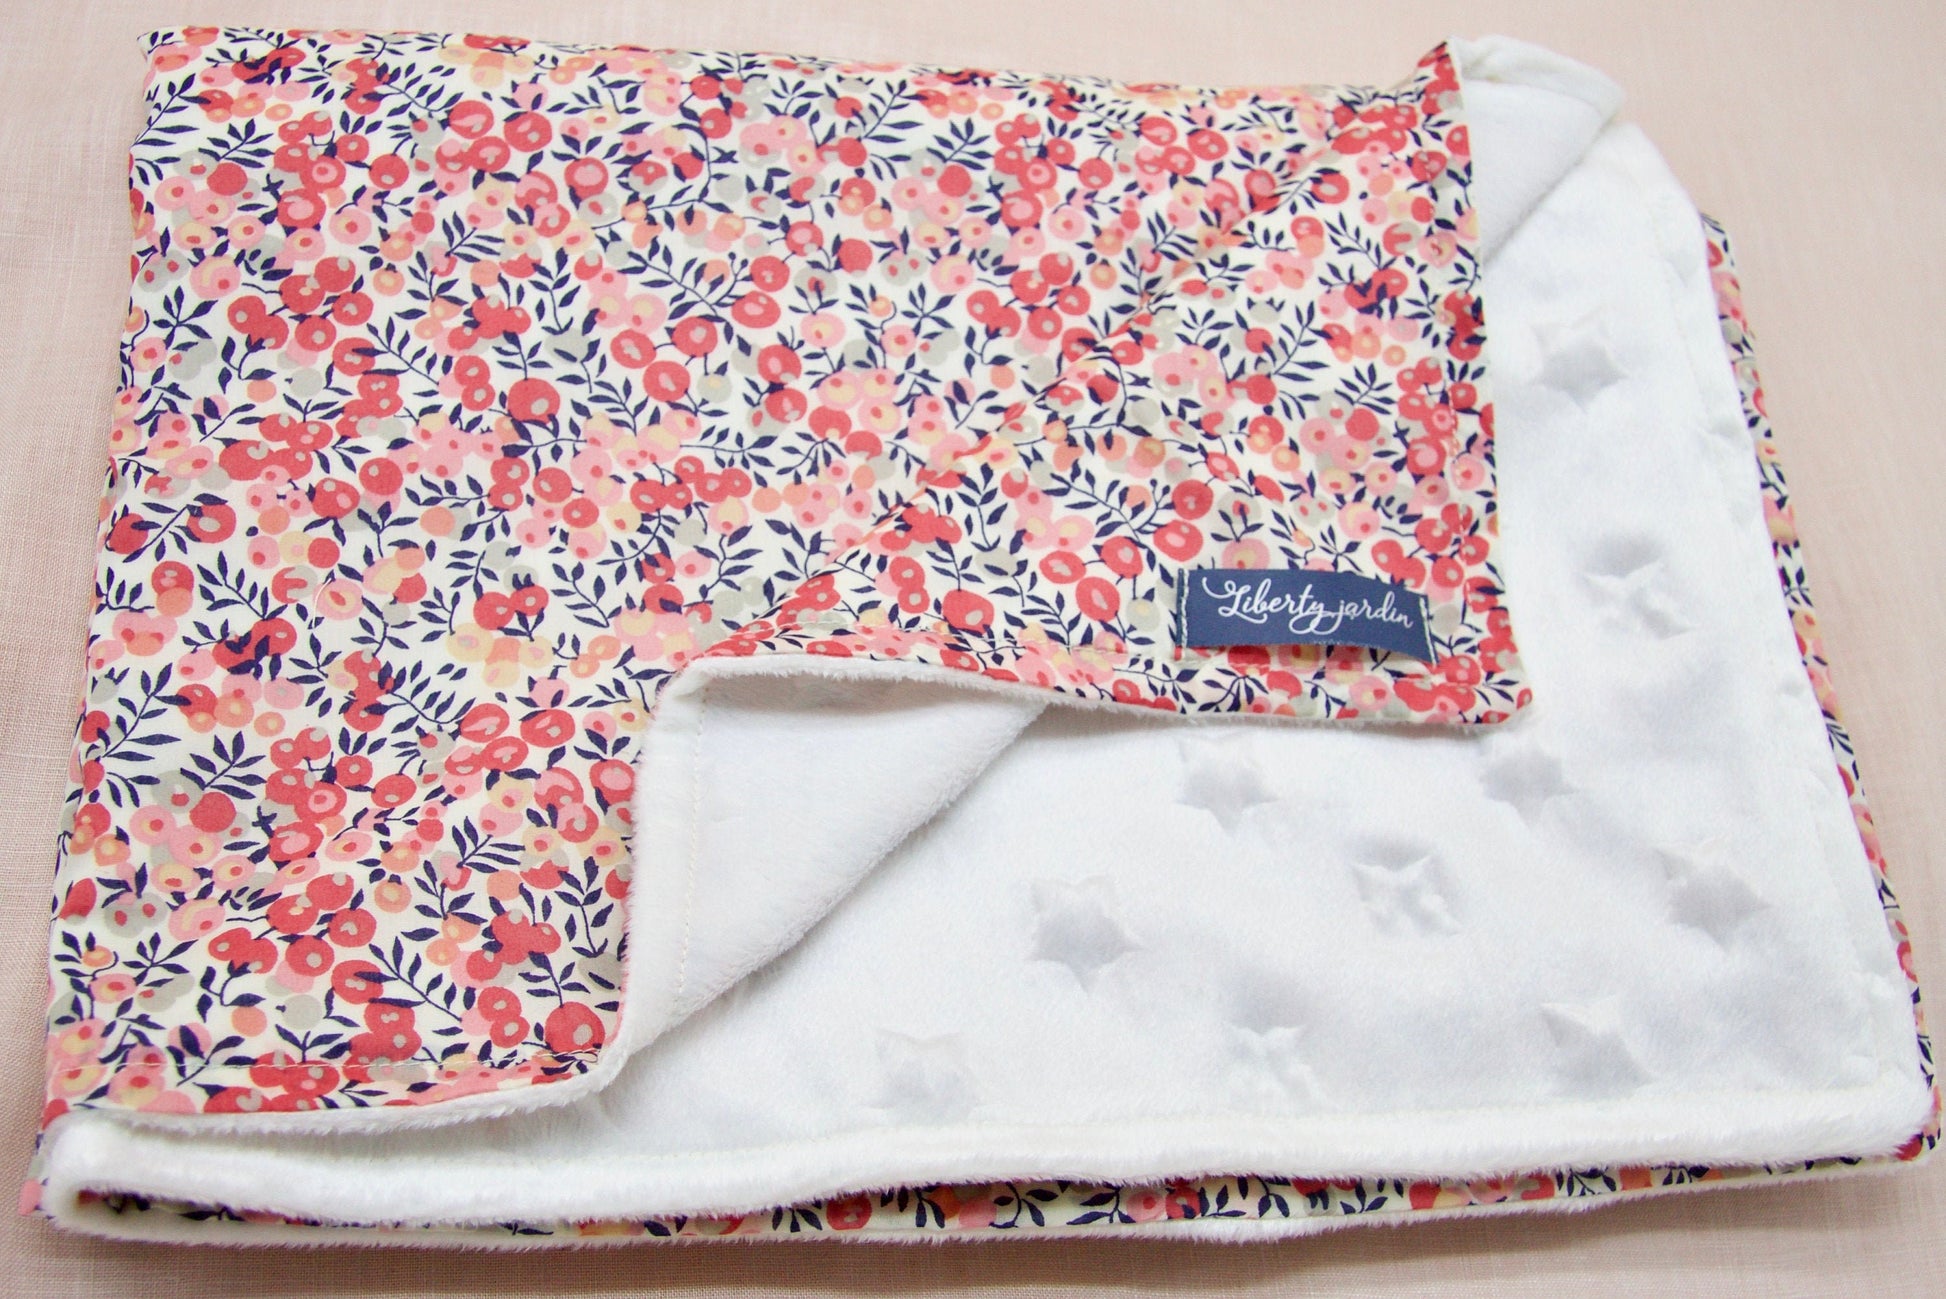 Liberty of London baby blanket organic cotton floral animal print pinky Terry warm soft new born gift eastern thanksgiving halloween Christmas a unisex baby boy girl new parents home coming soft breathable breathable enfant swaddle cover tummy time